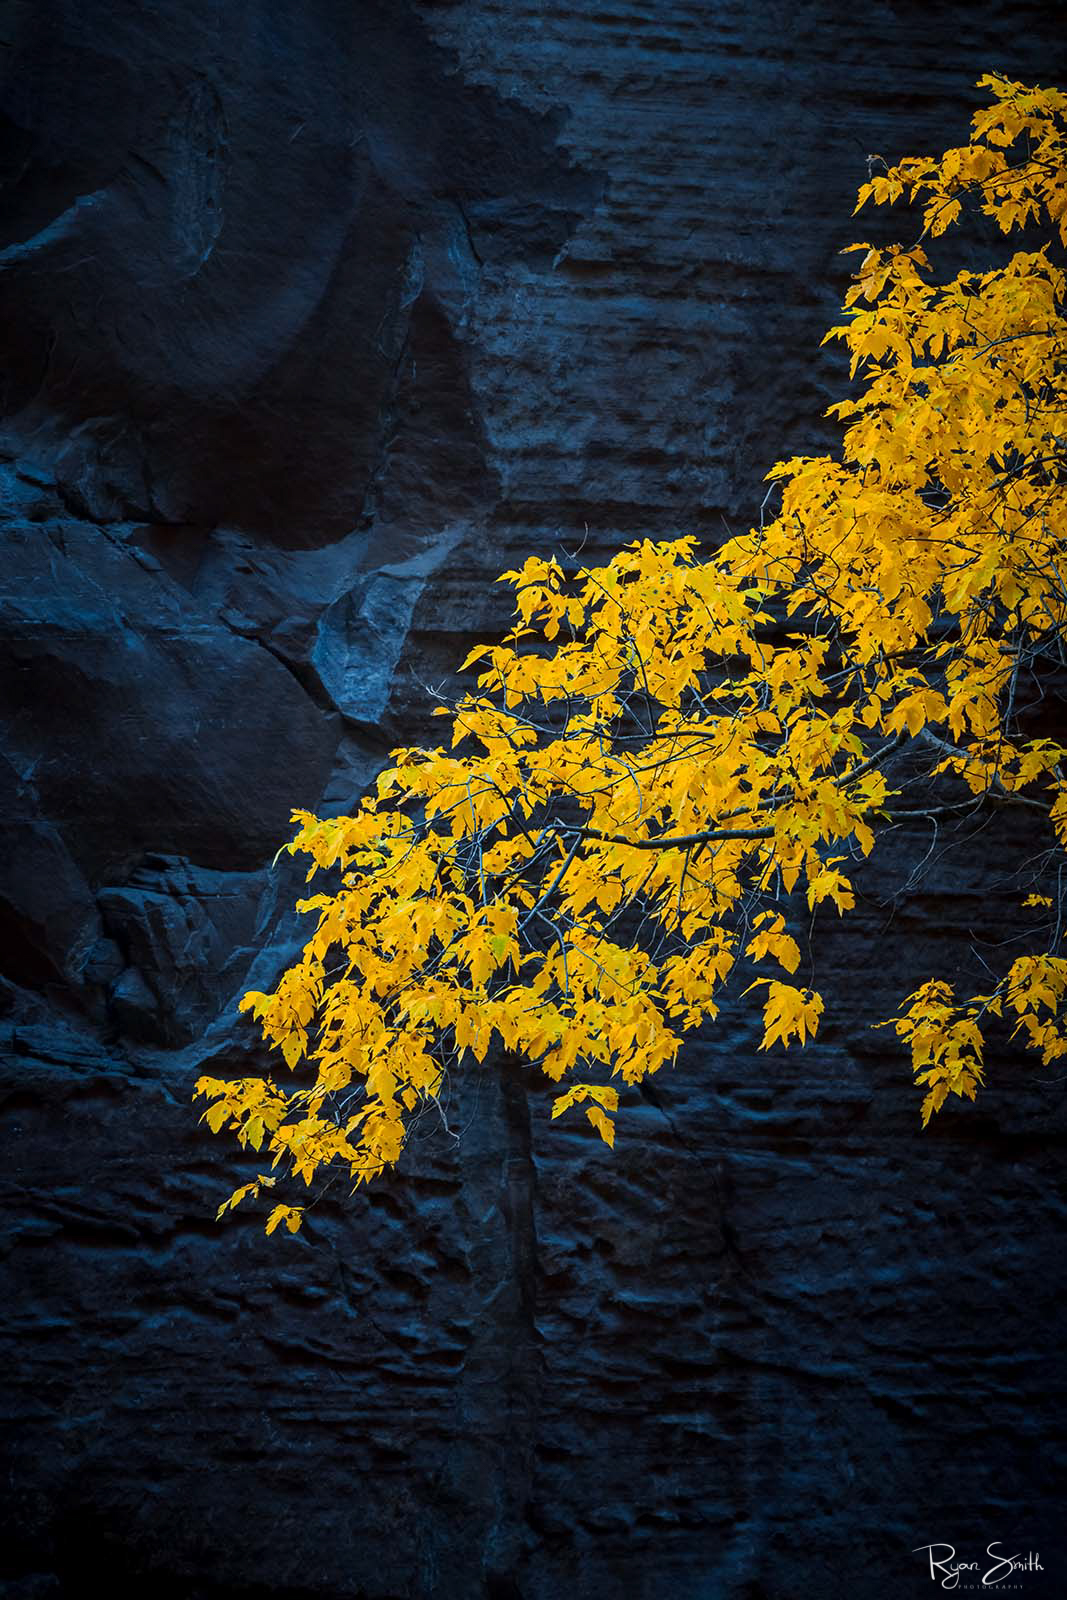 An abstract photo with a branch with bright yellow leaves is shown on the right side in front of a dark gray rock wall.